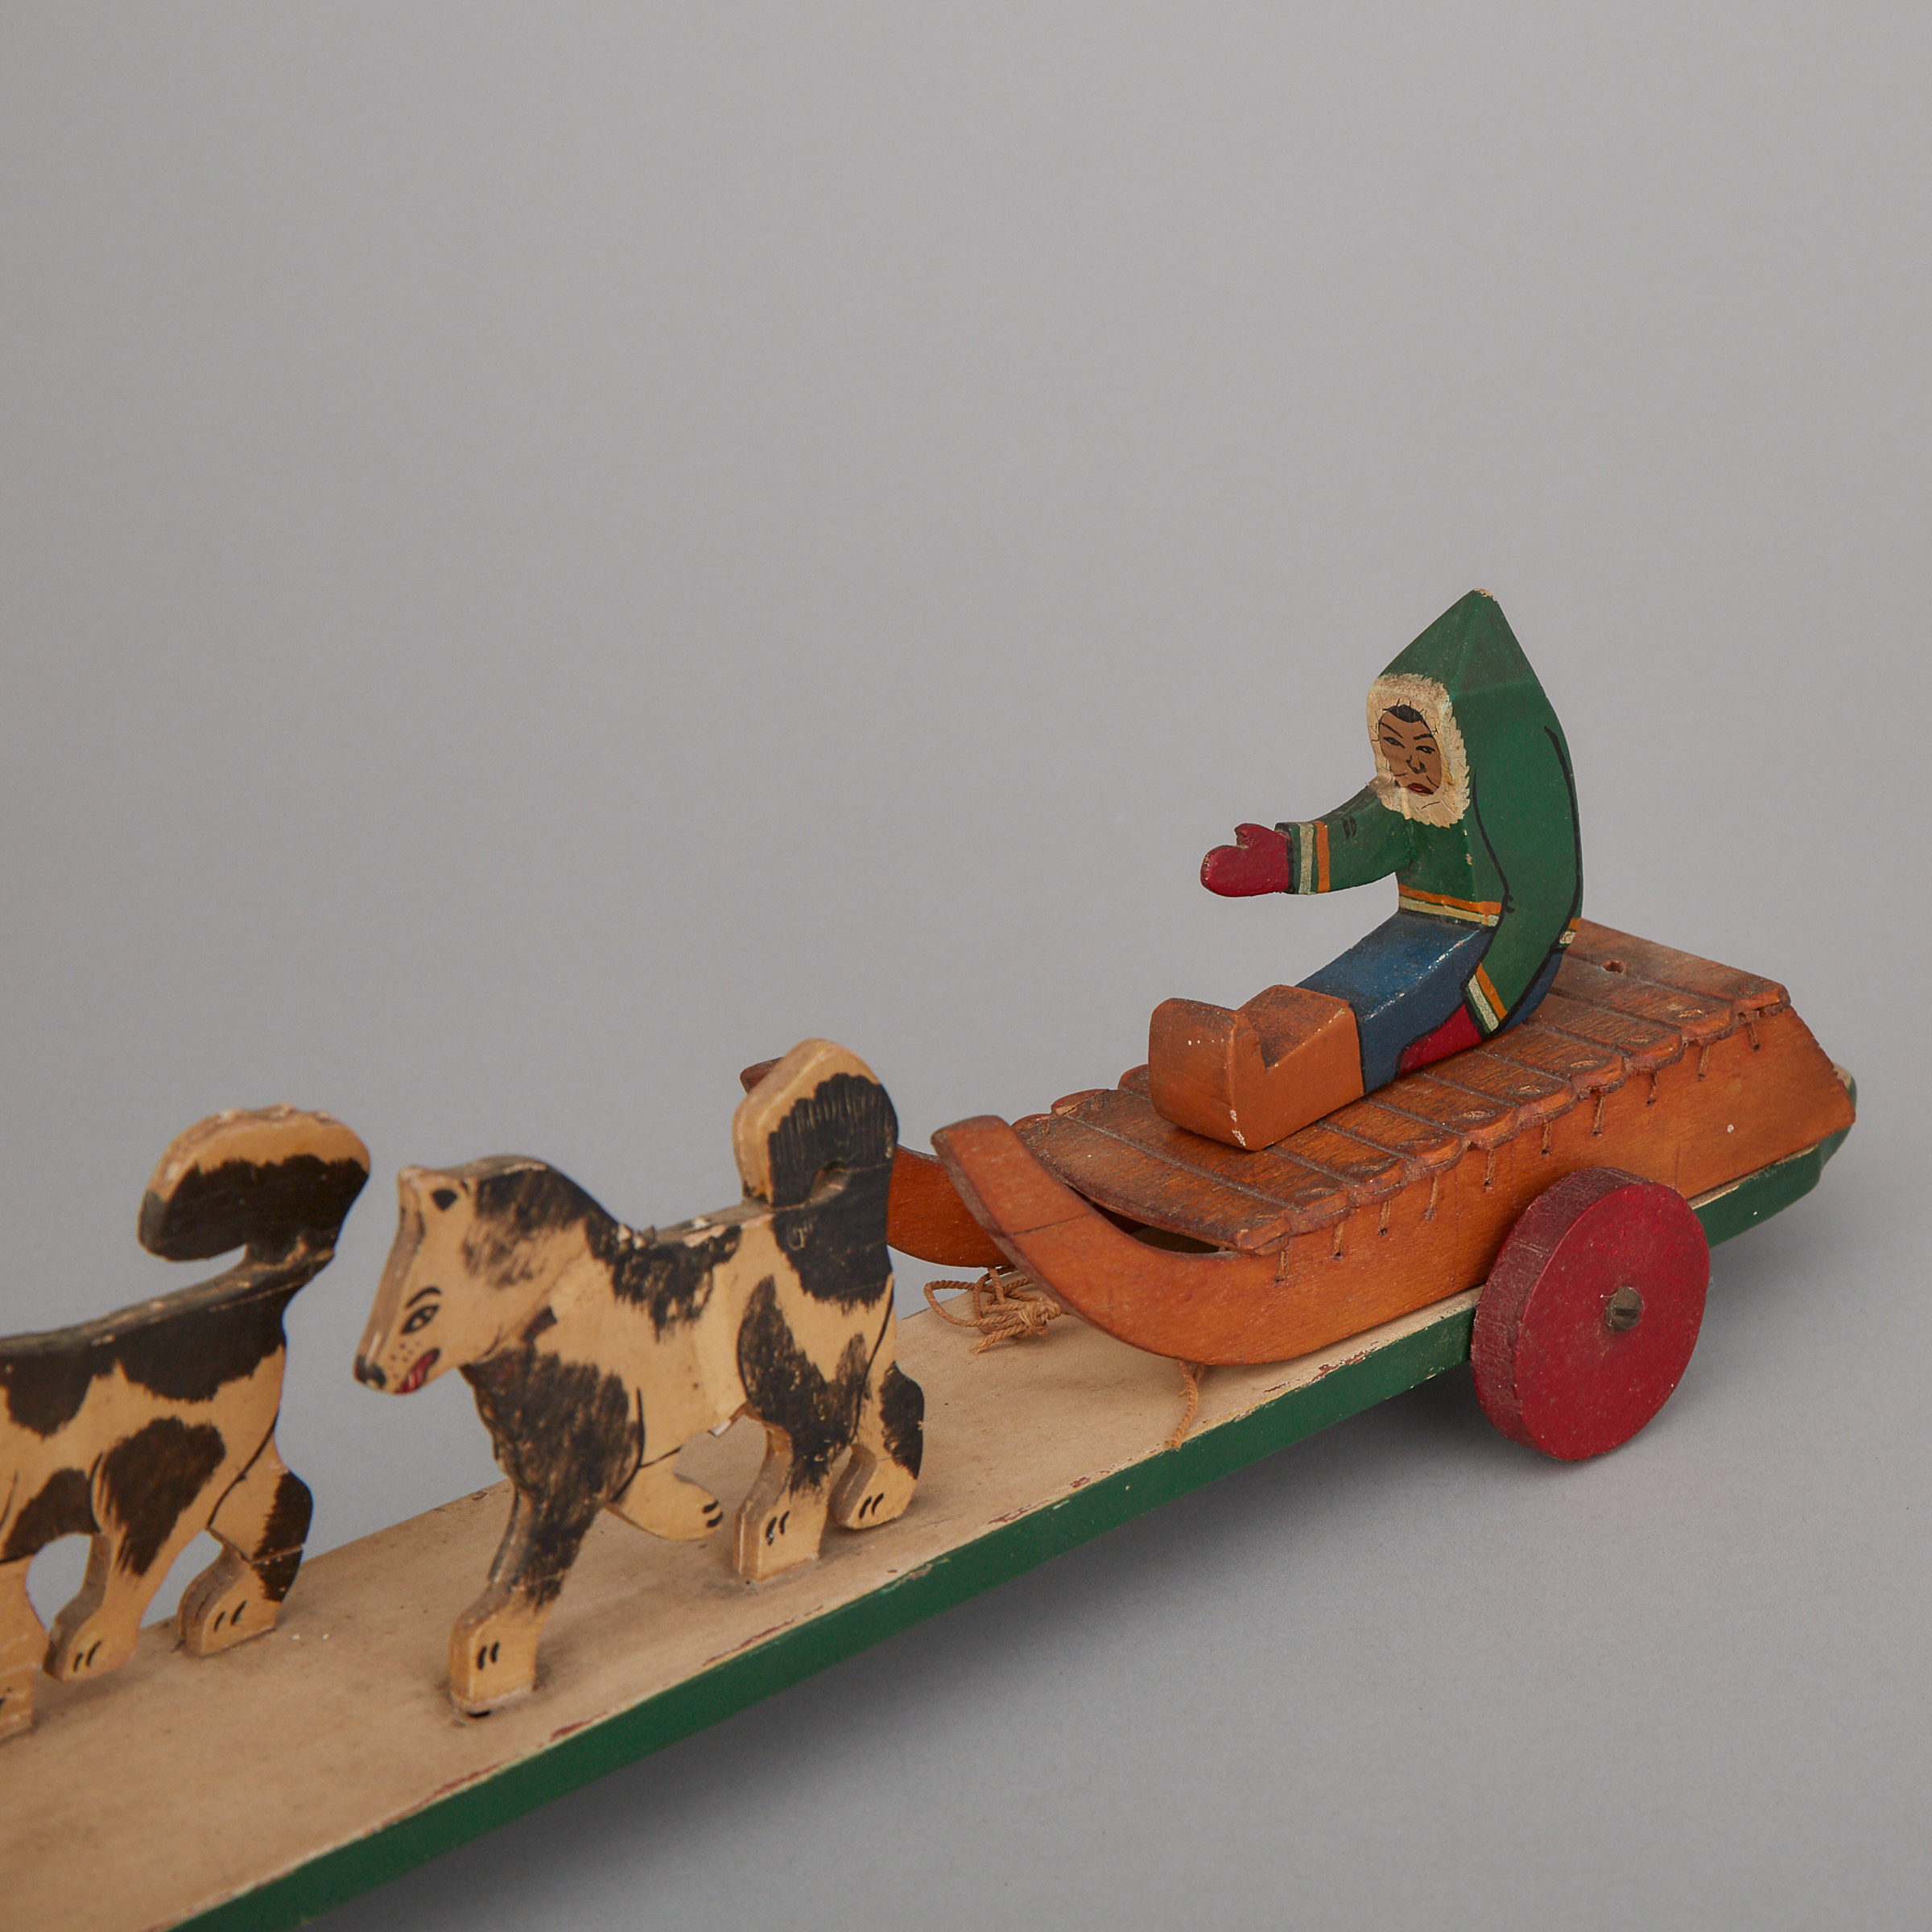 Grenfell Labrador Industries Painted Wood Model Dog Sled Team Pull Toy, c.1930